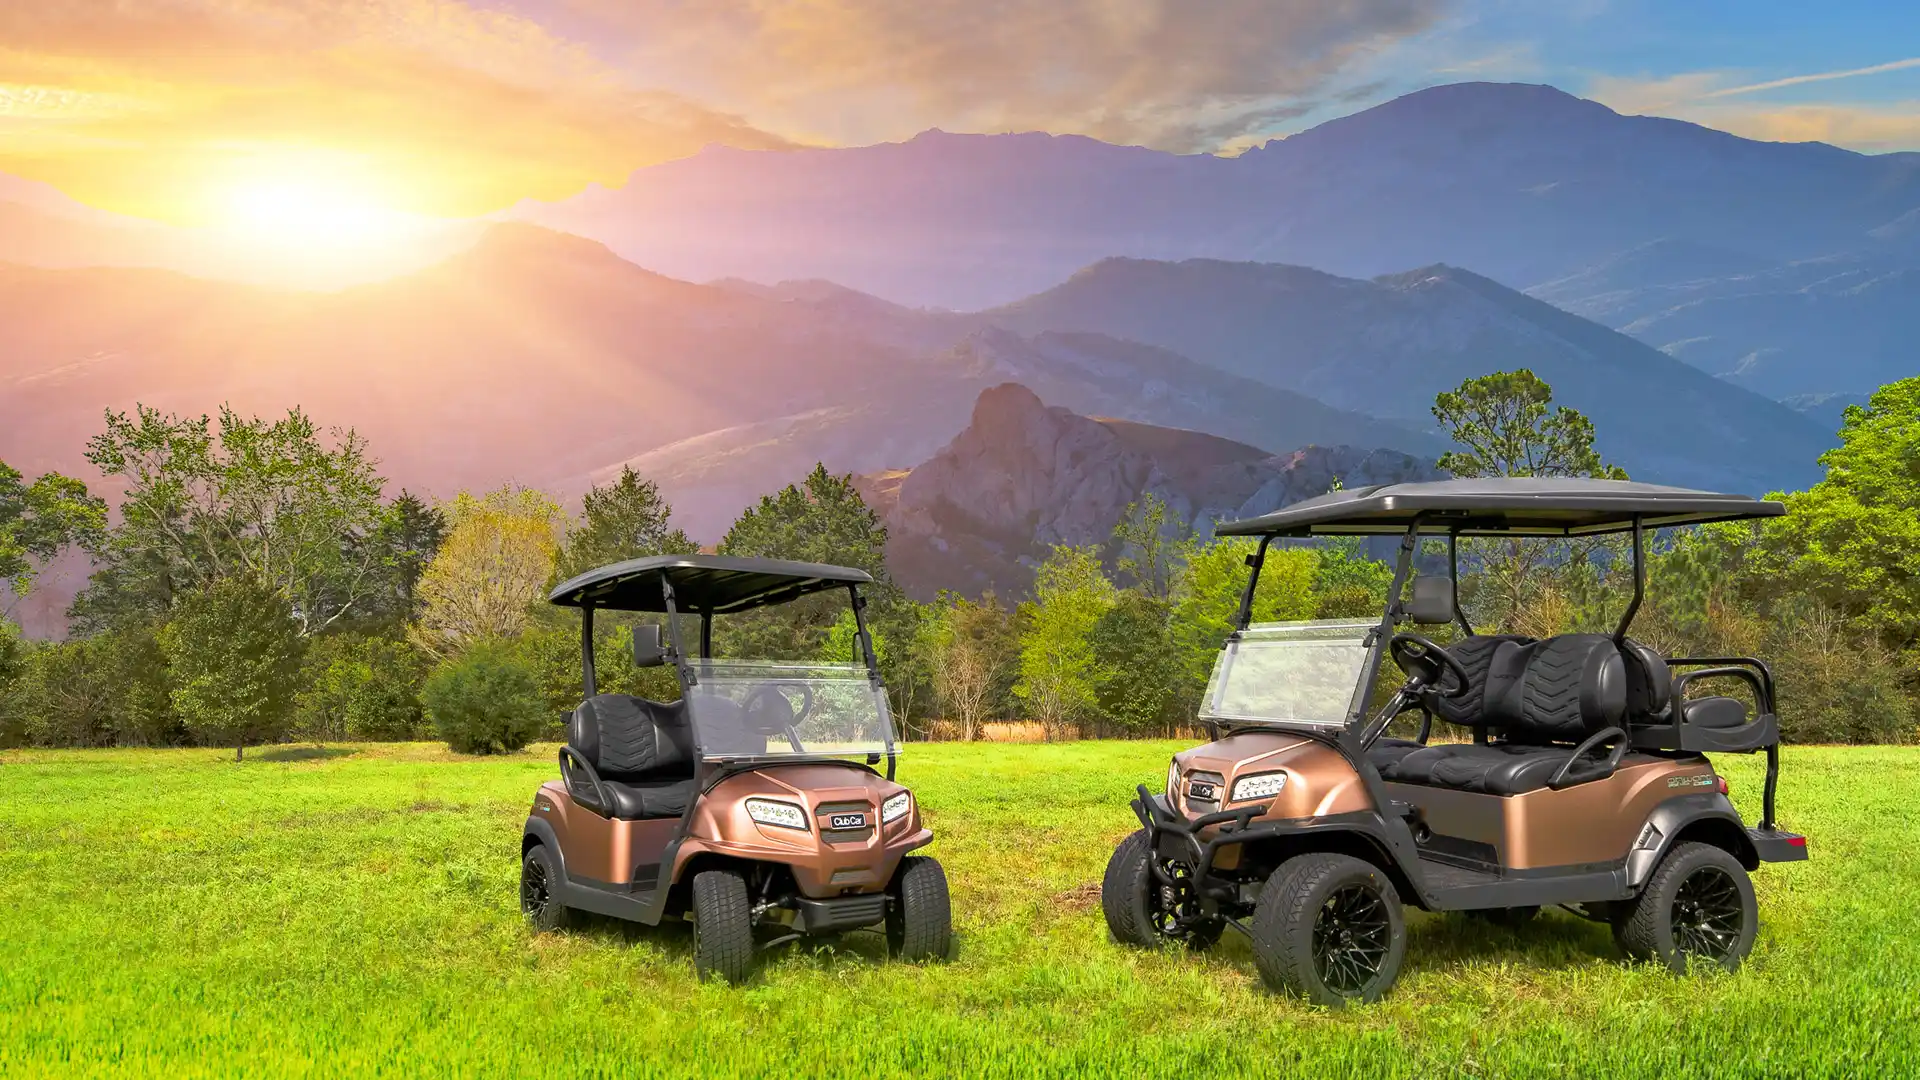 Onward Sunrise Special Edition Golf Carts in 2 and lifted 4 passenger models